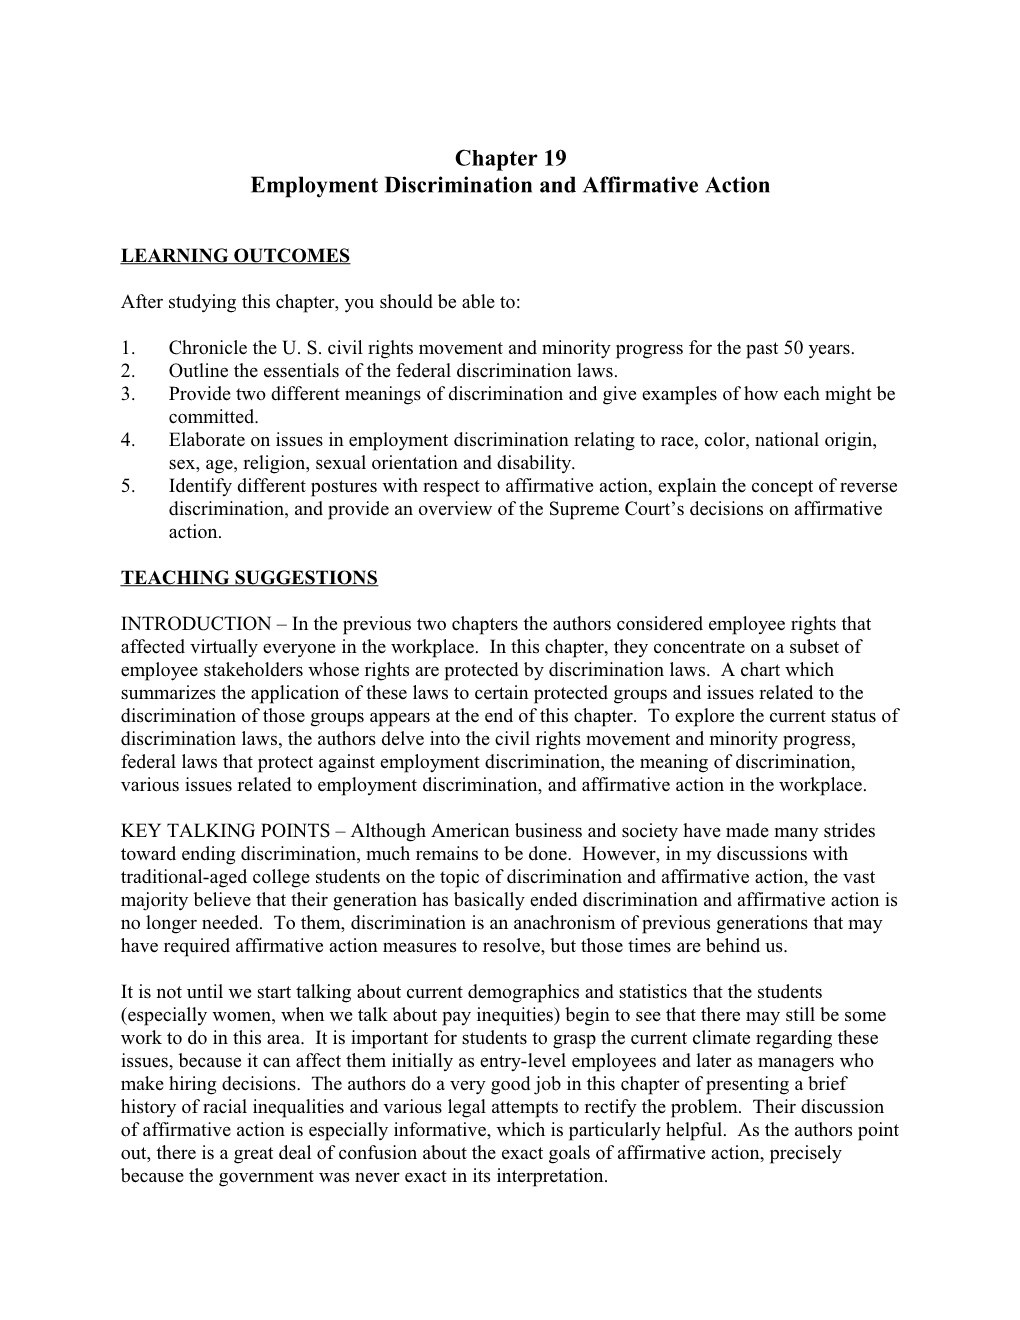 Employment Discrimination and Affirmative Action